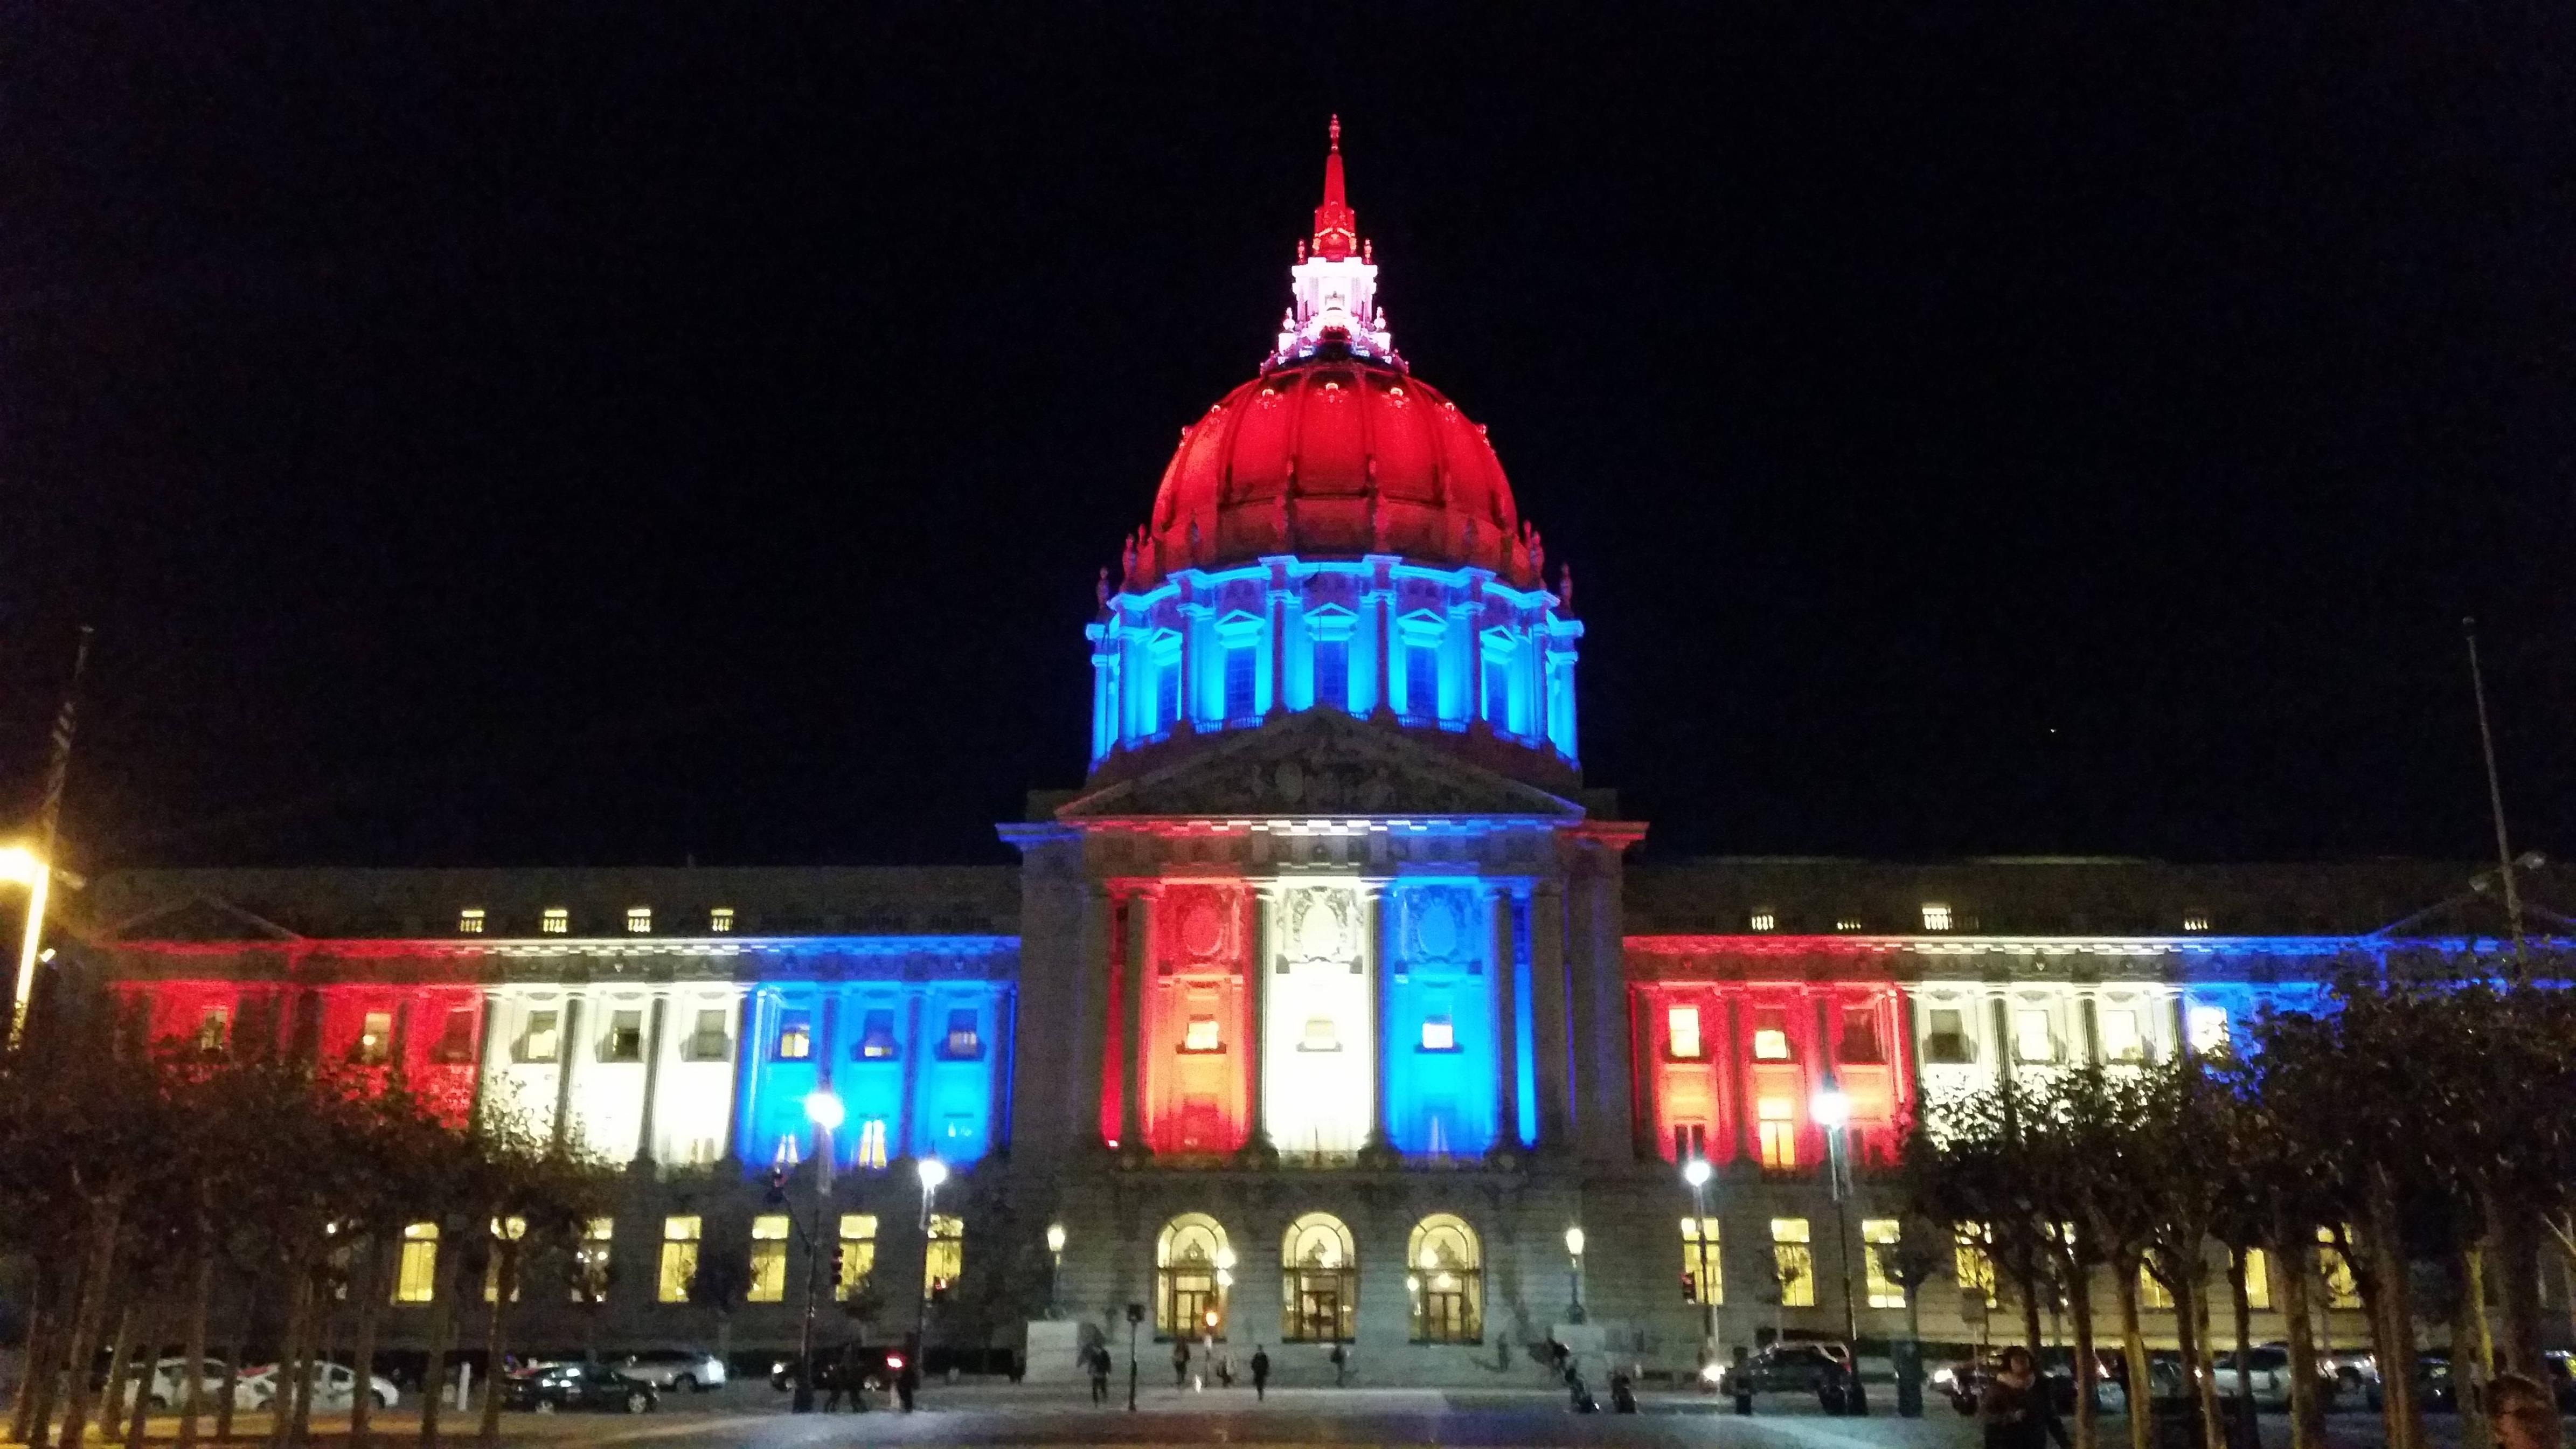 City Hall in San Franciso showing support to those in Paris, France